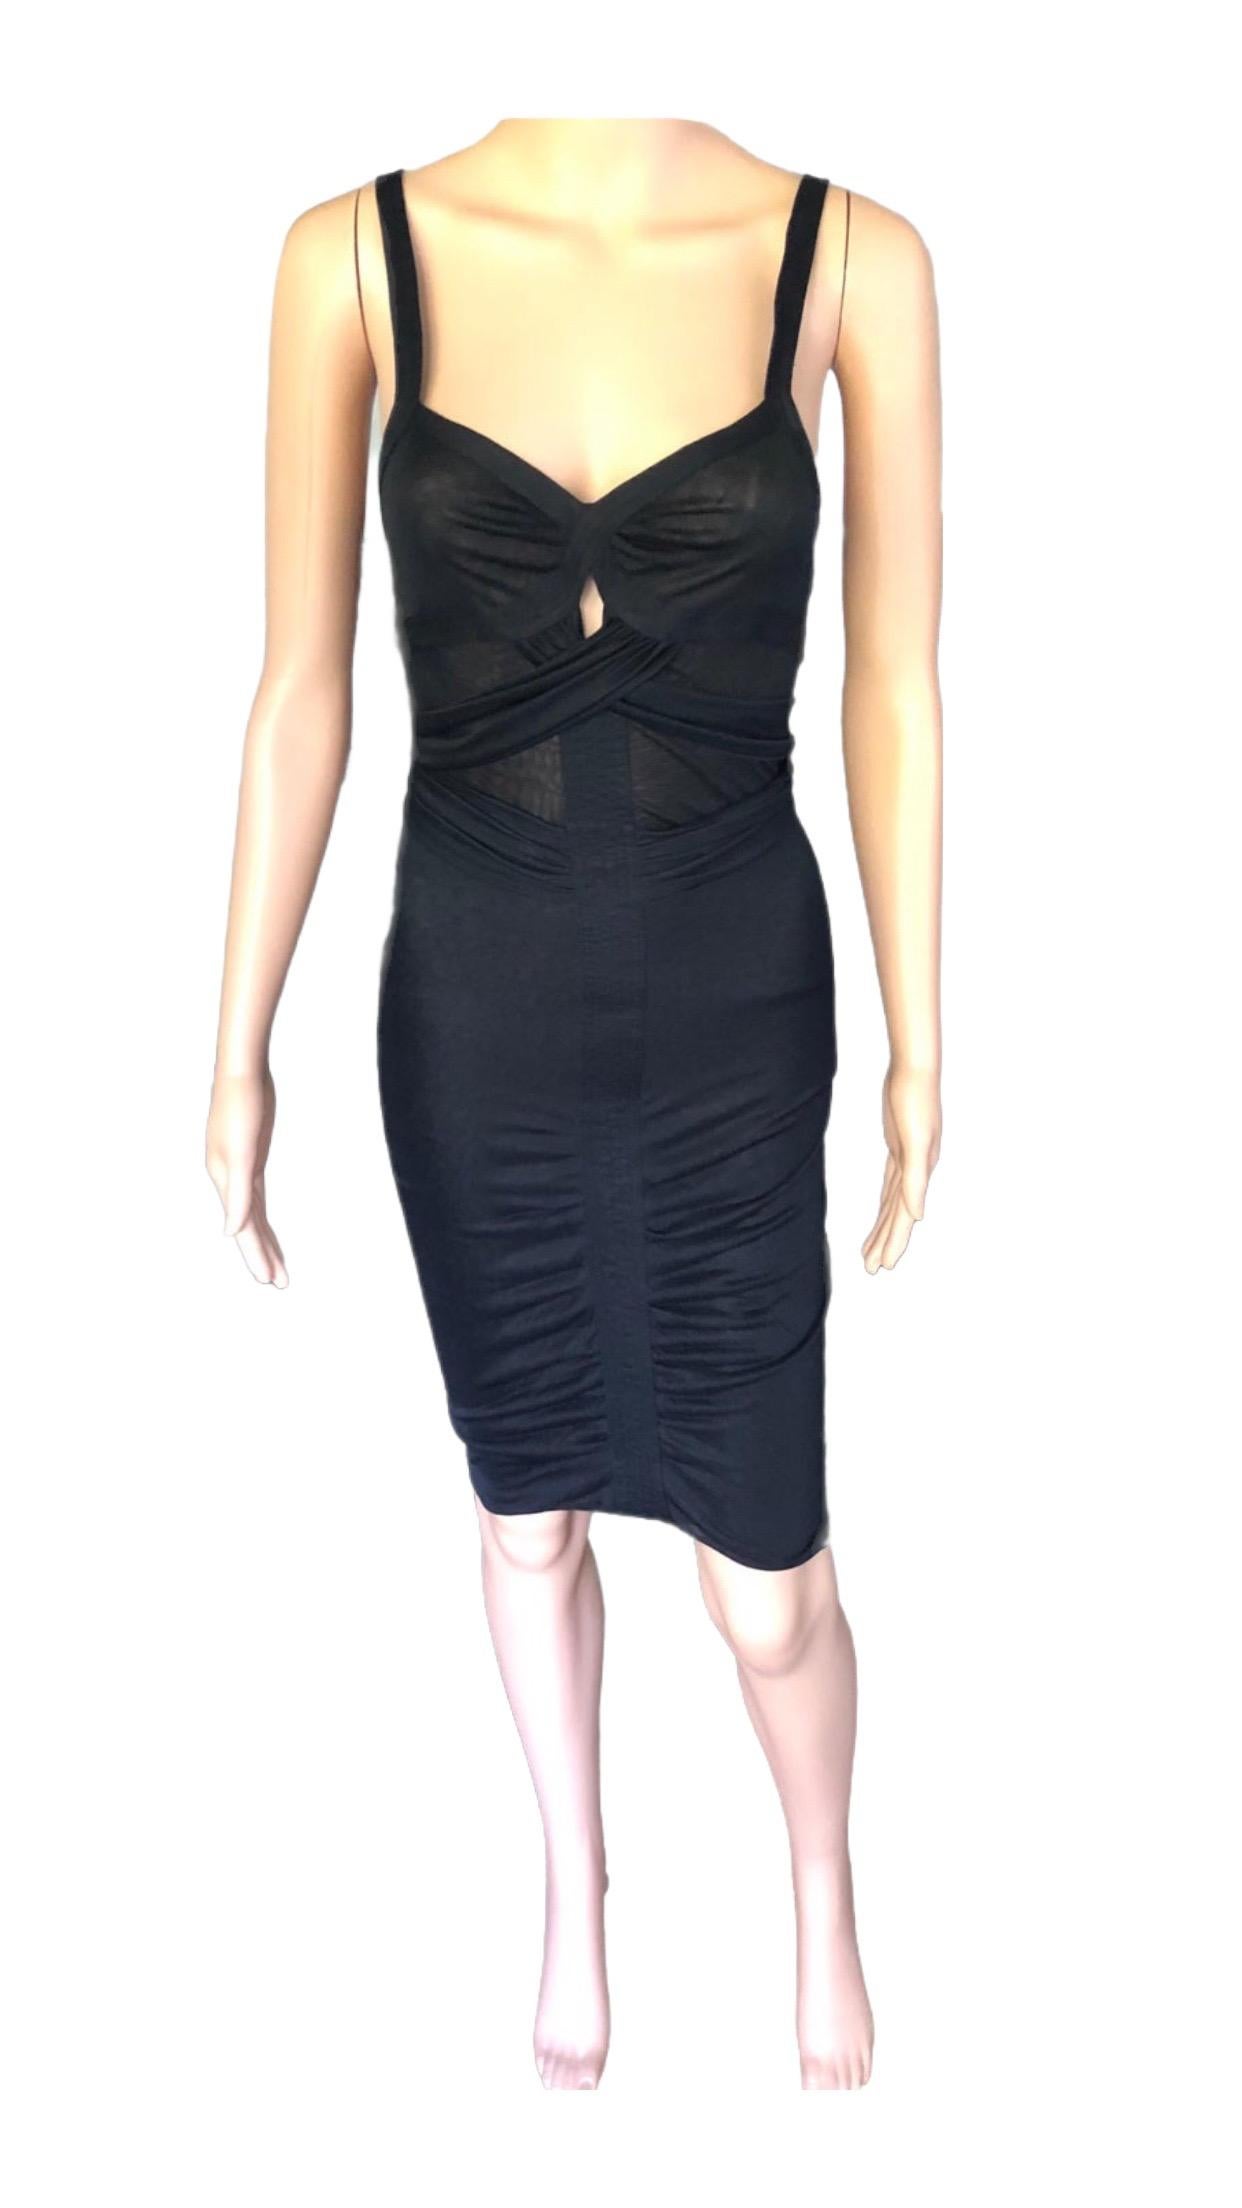 Women's 1990'S Gucci by Tom Ford Semi-Sheer Knit Bodycon Black Dress For Sale